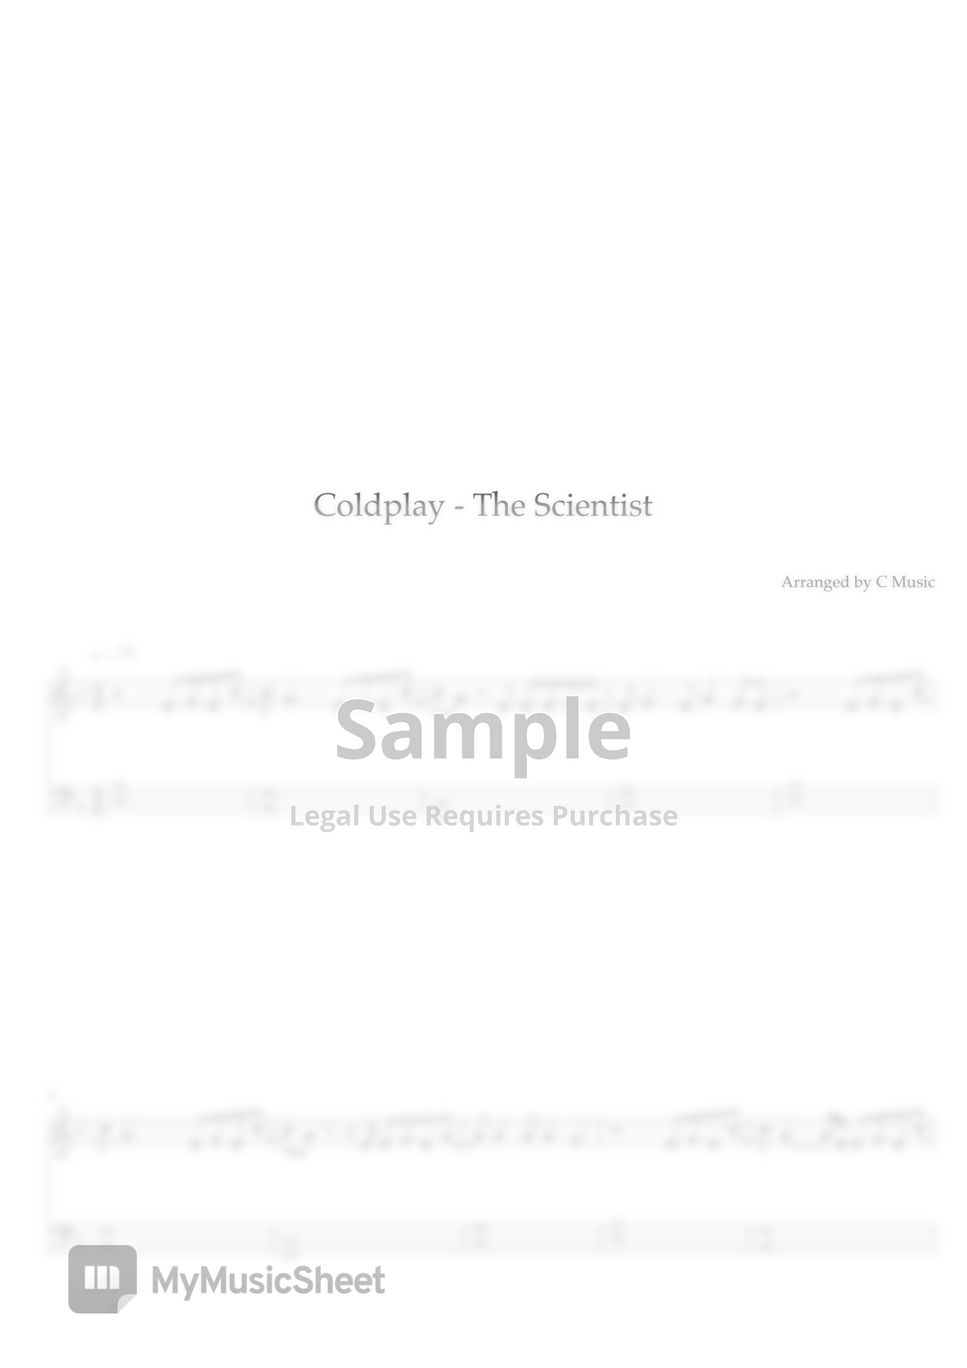 Coldplay - The Scientist (Easy Version) by C Music